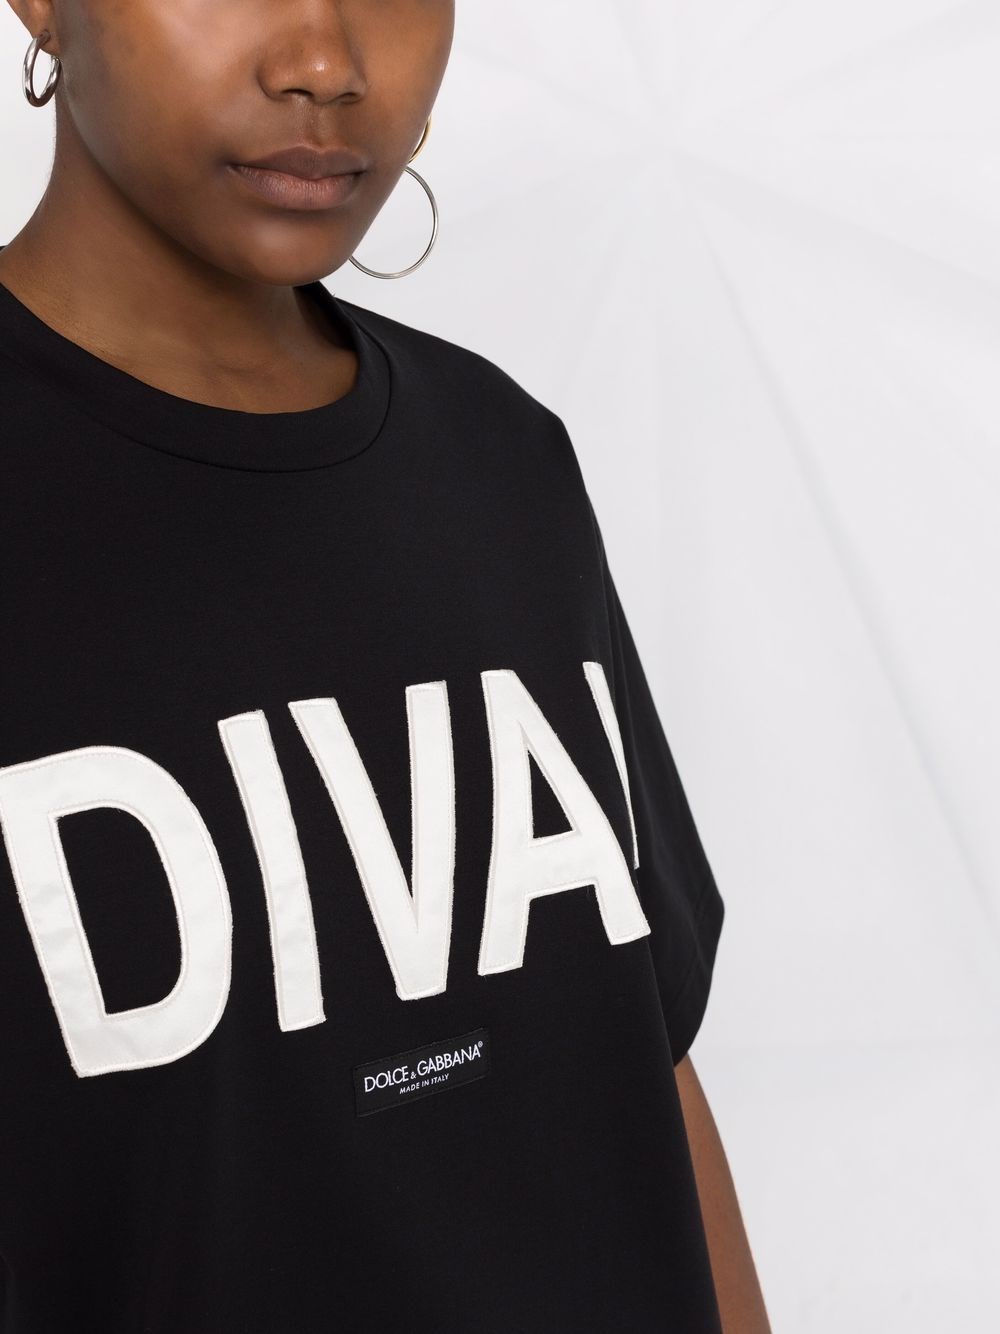 dolce & gabbana T-SHIRT DIVA available on montiboutique.com - 42194